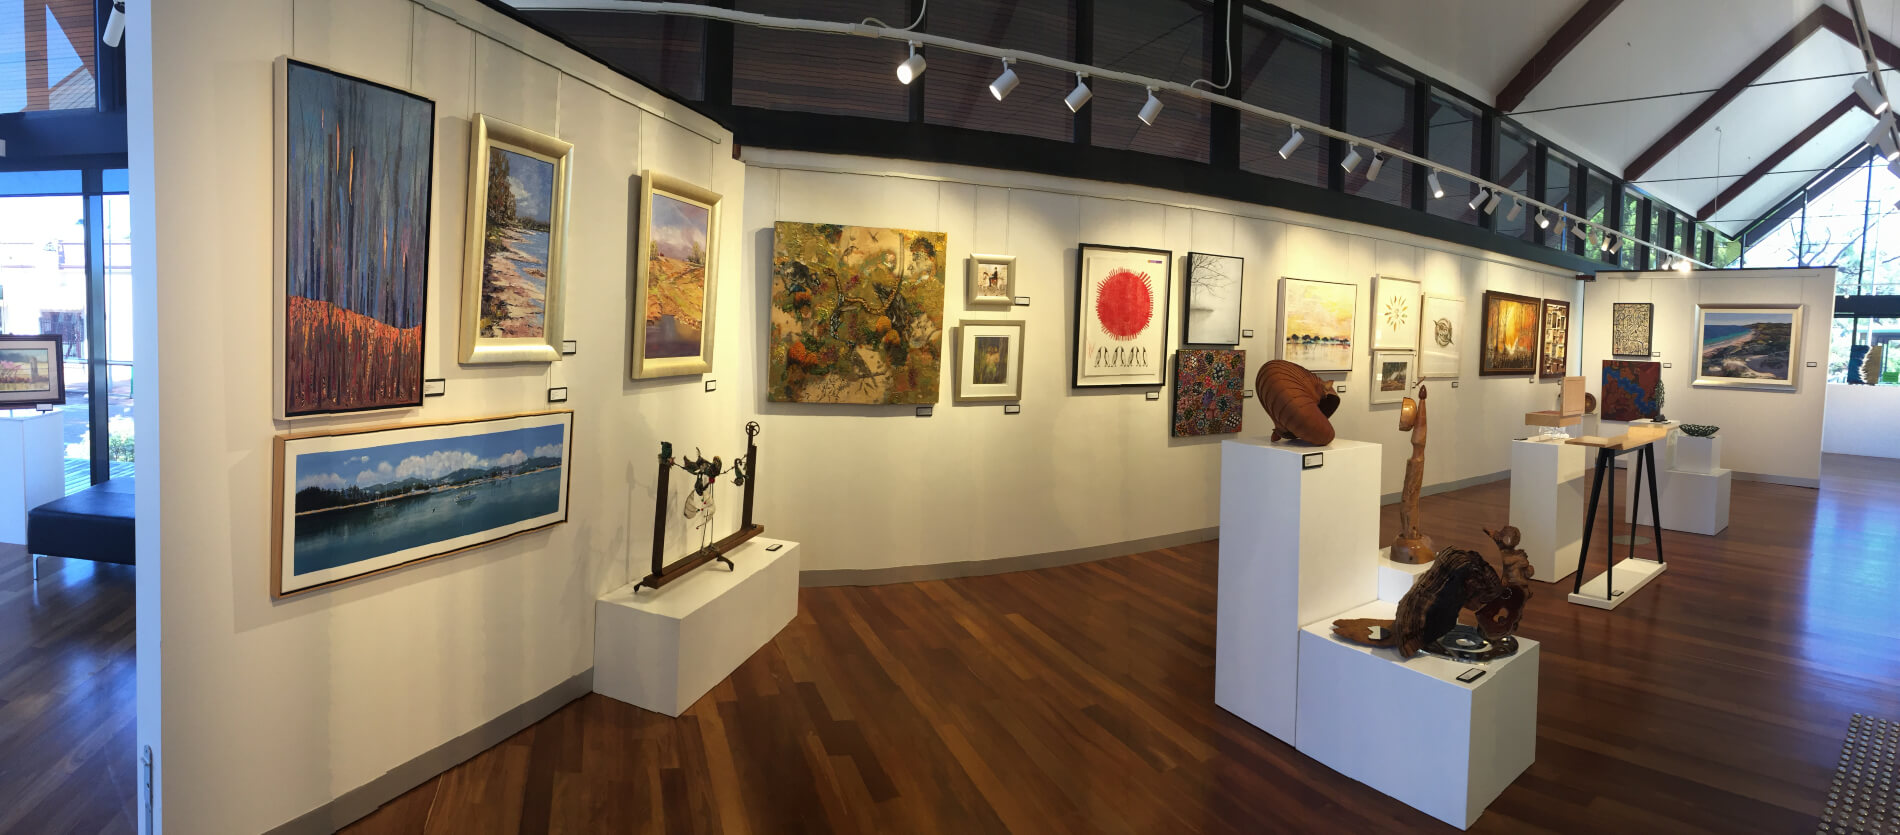 Lions Club Art Awards 2023 Exhibition being held at Zig Zag Gallery